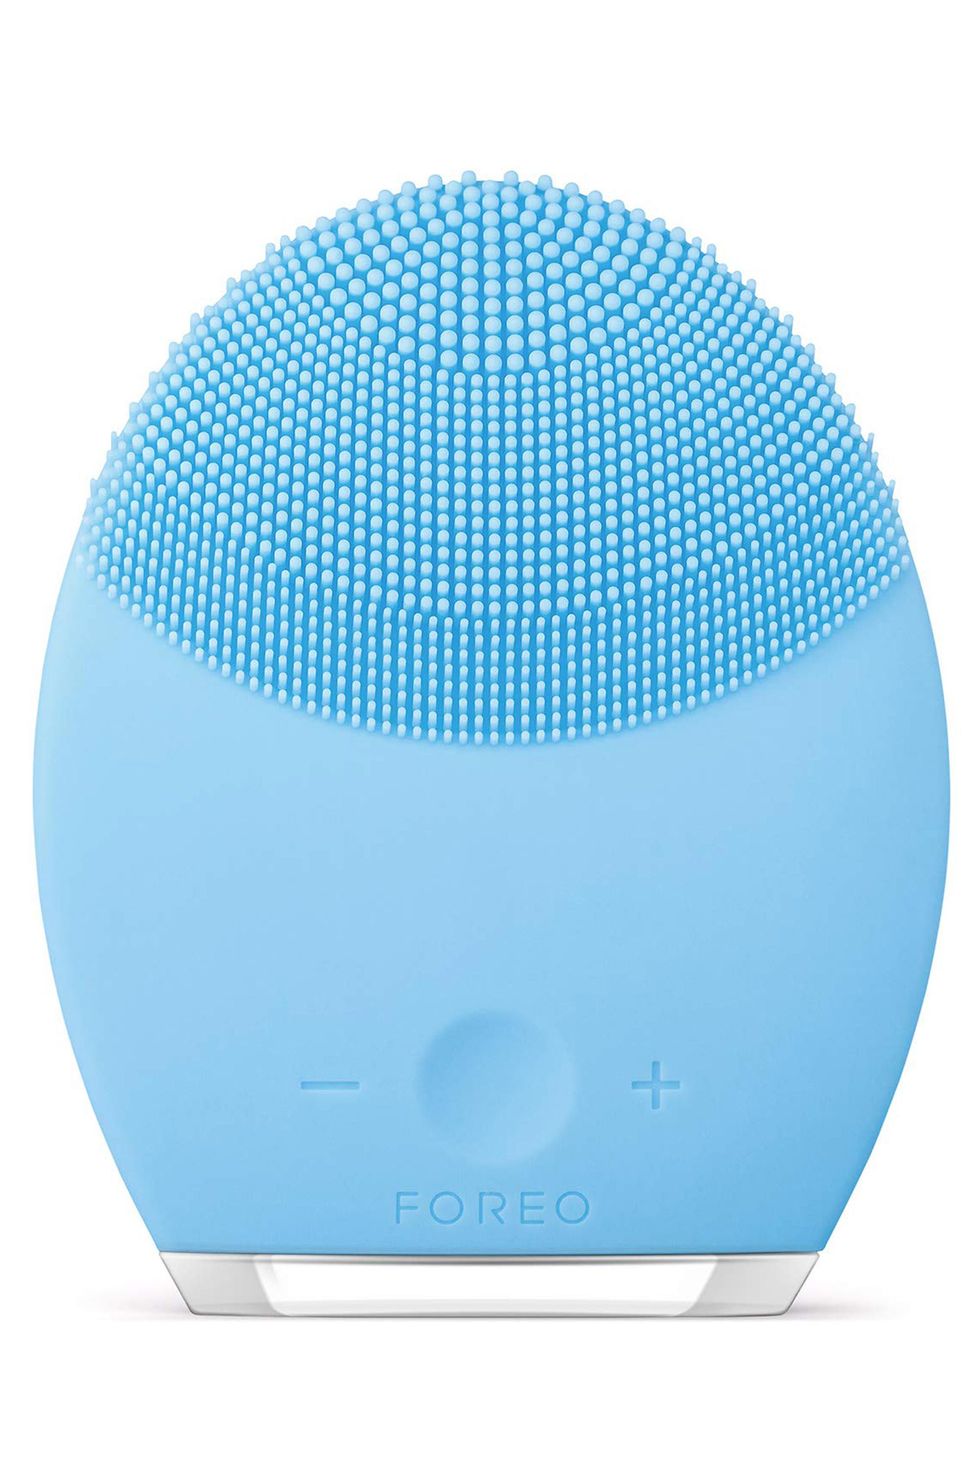 Foreo Luna 2 Personalized Facial Cleansing Brush & Anti-Aging Face Massager